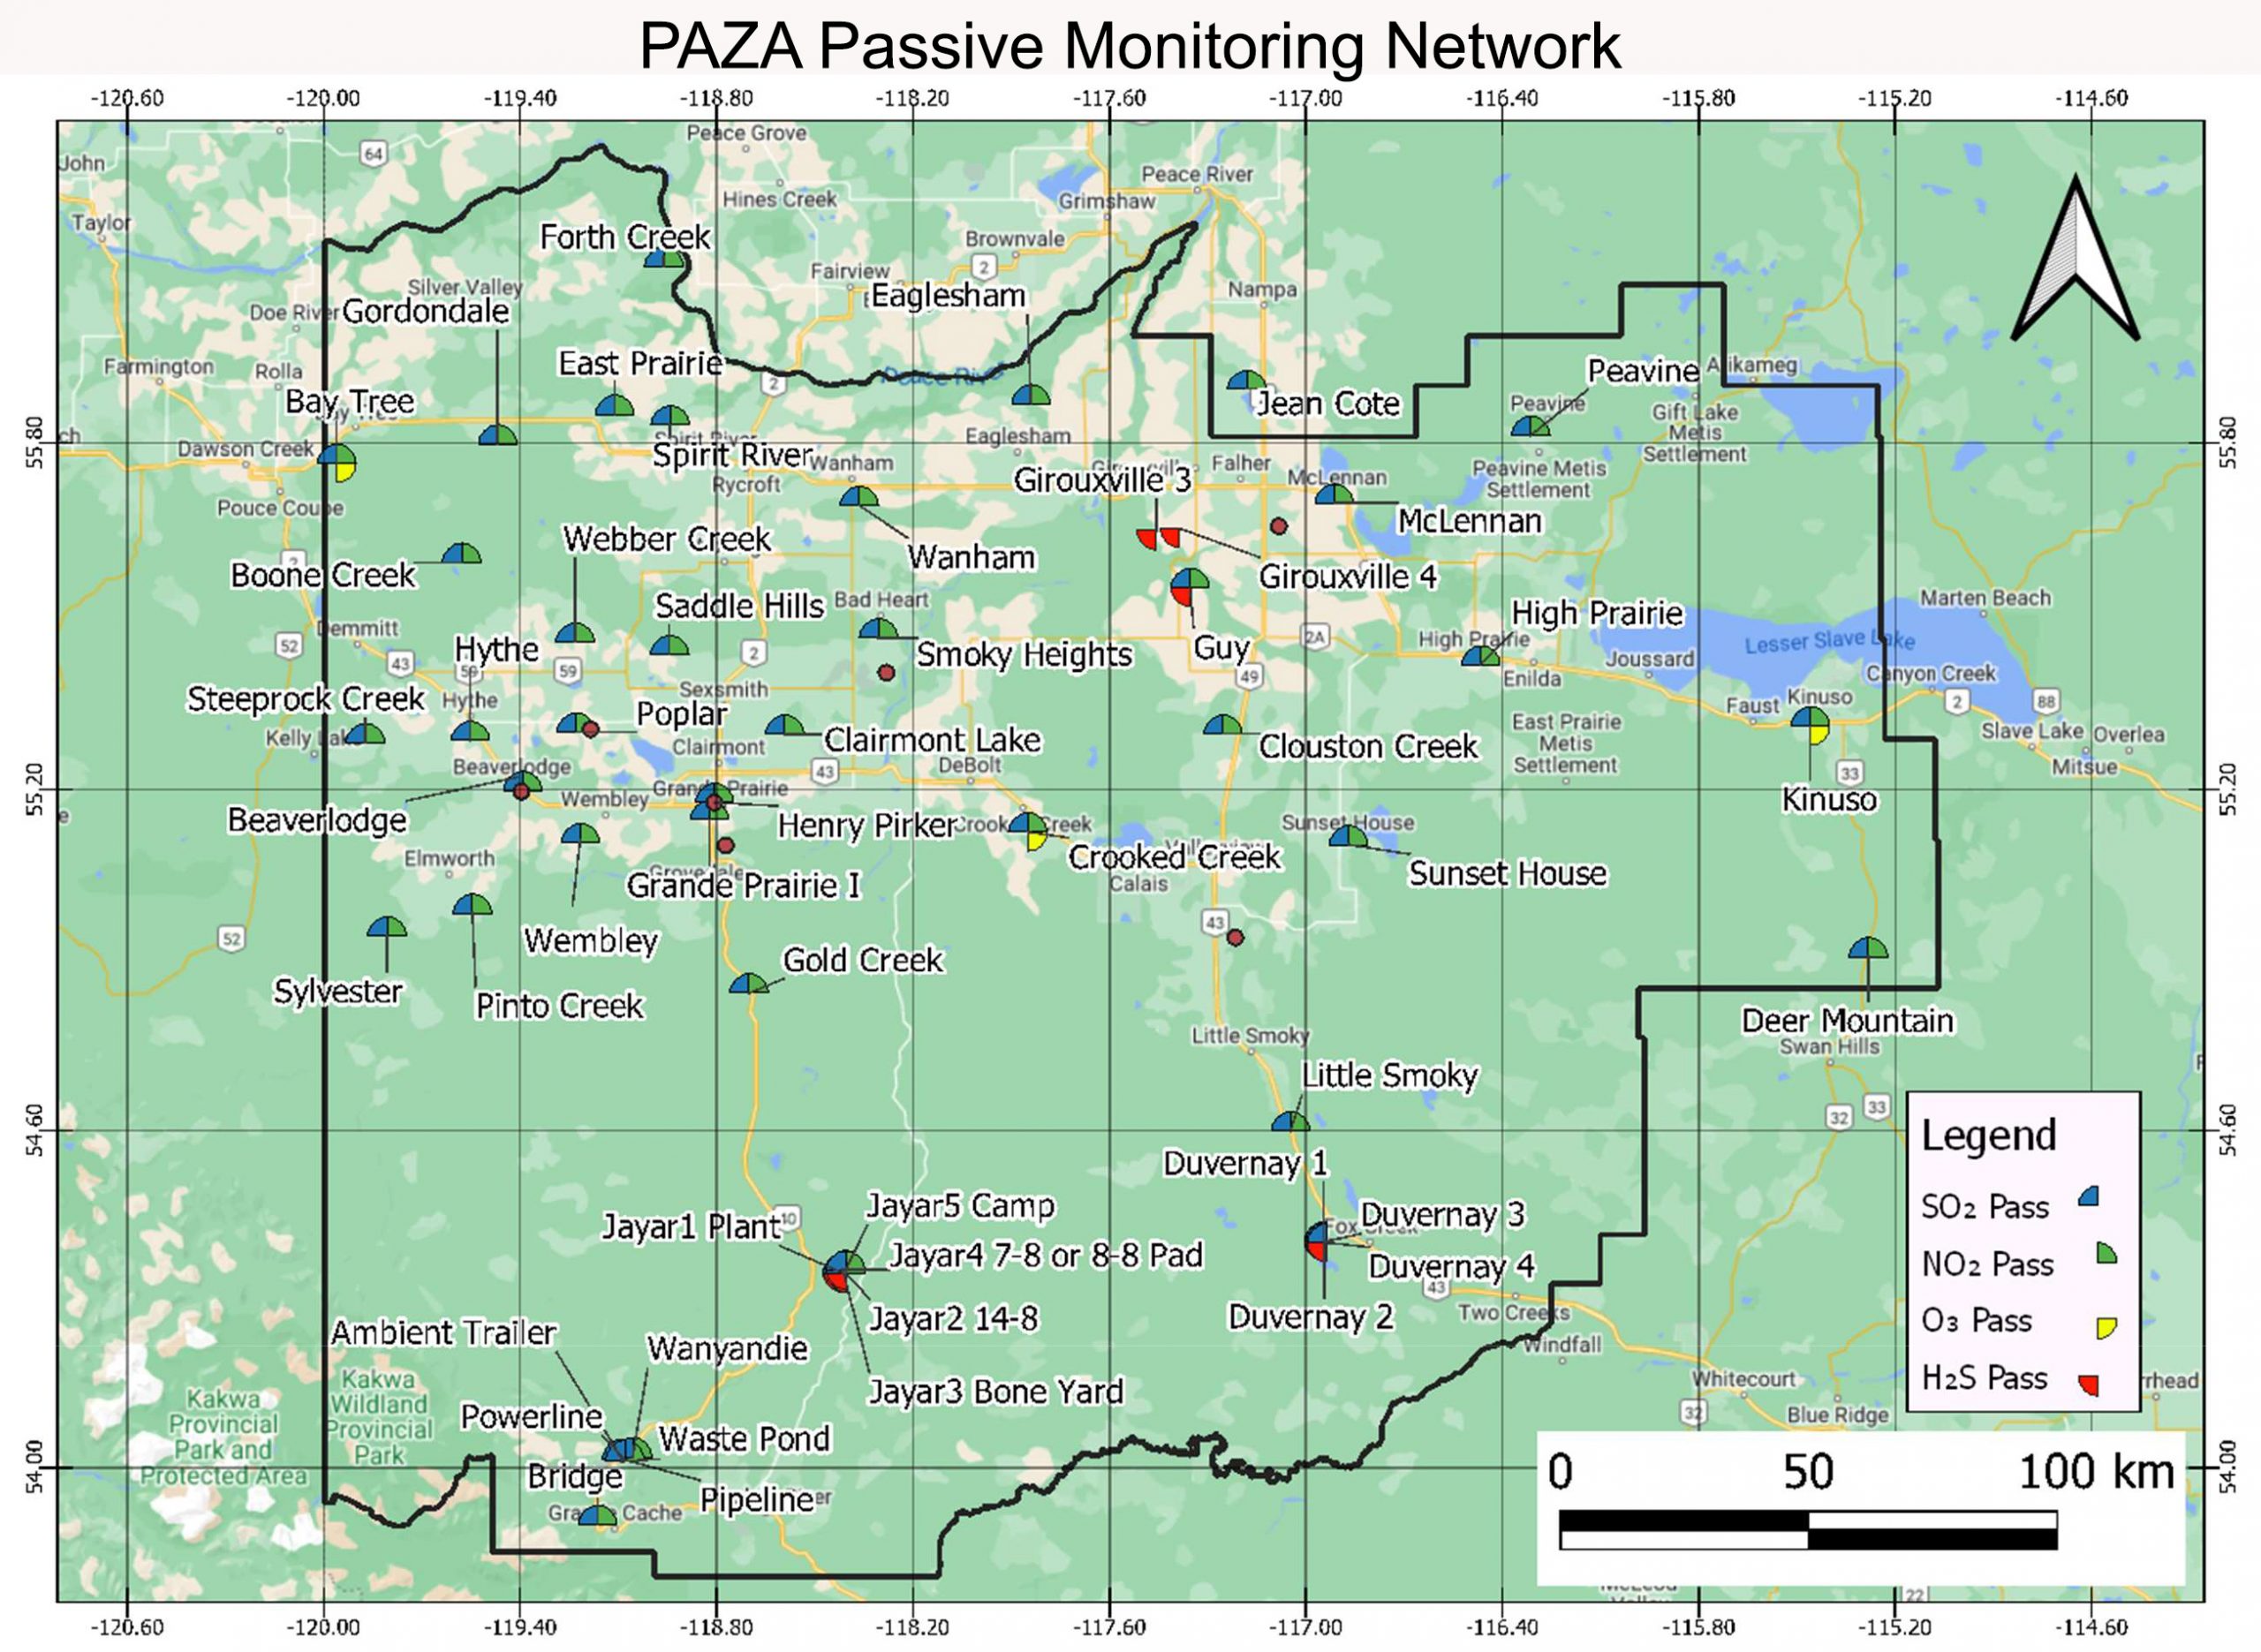 PAZA Region Overview Map